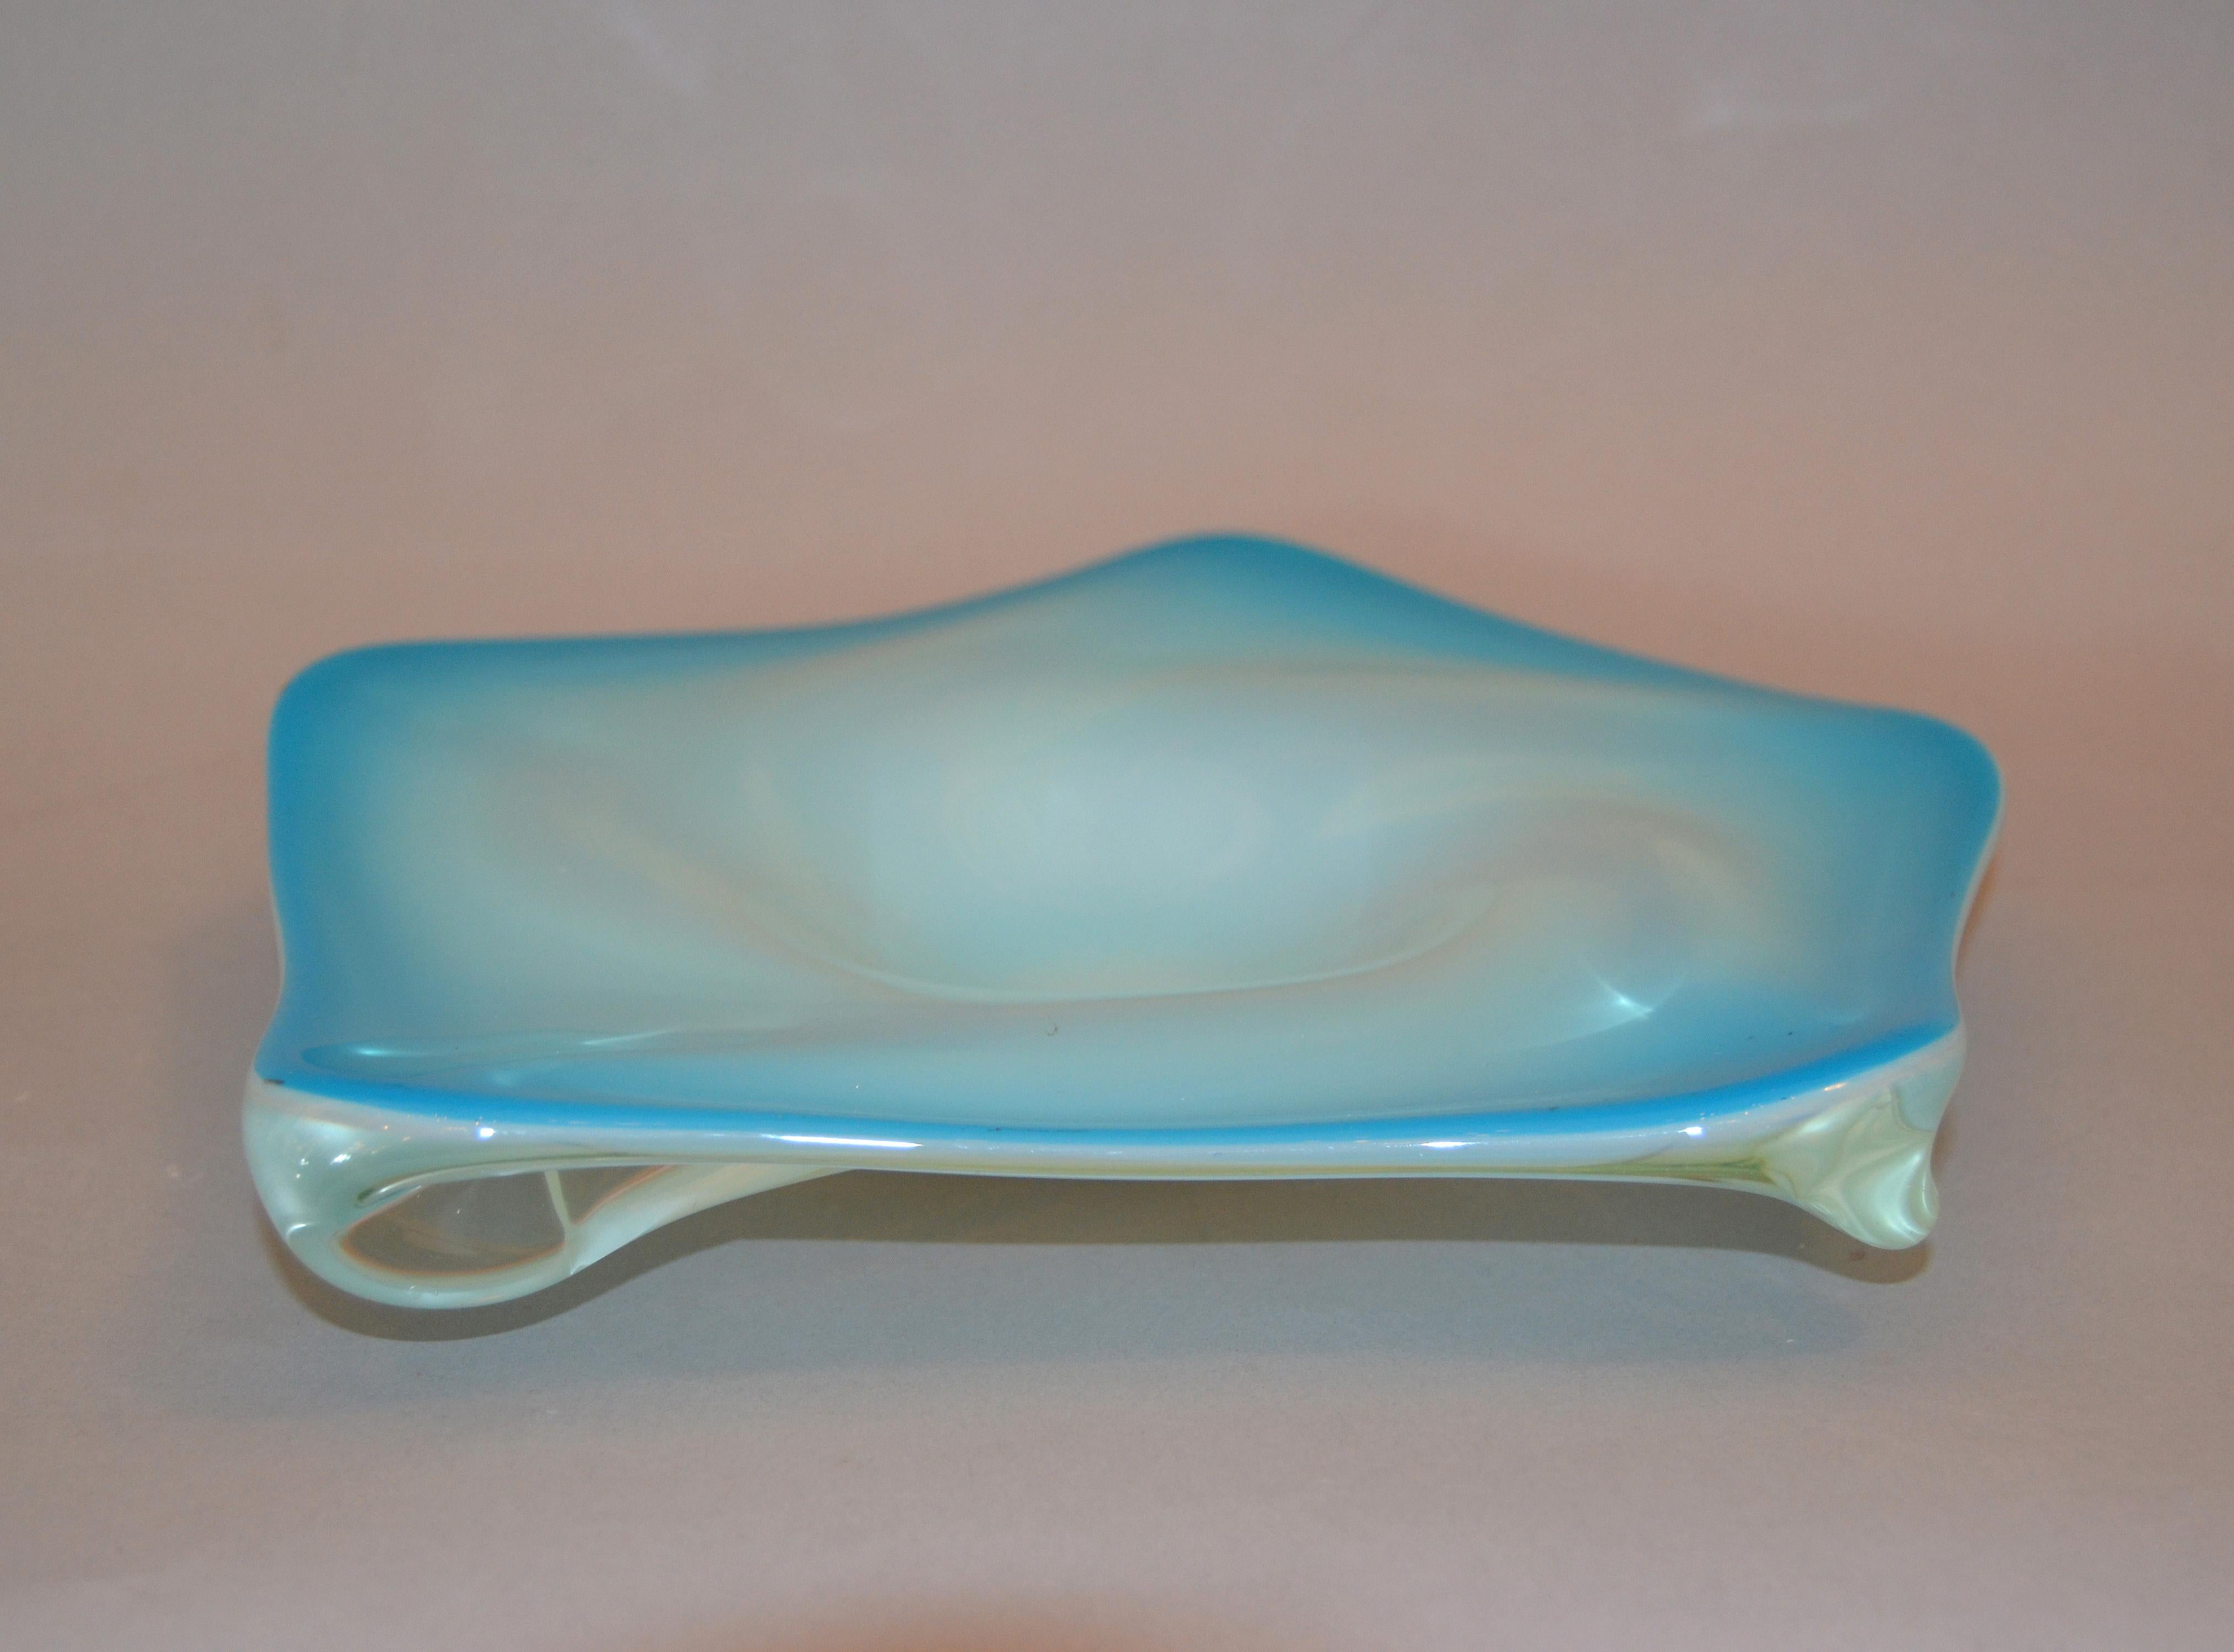 Murano glass hand blown light blue, white and clear decorative bowl, catchall from Italy.
No markings.
Simply beautiful.